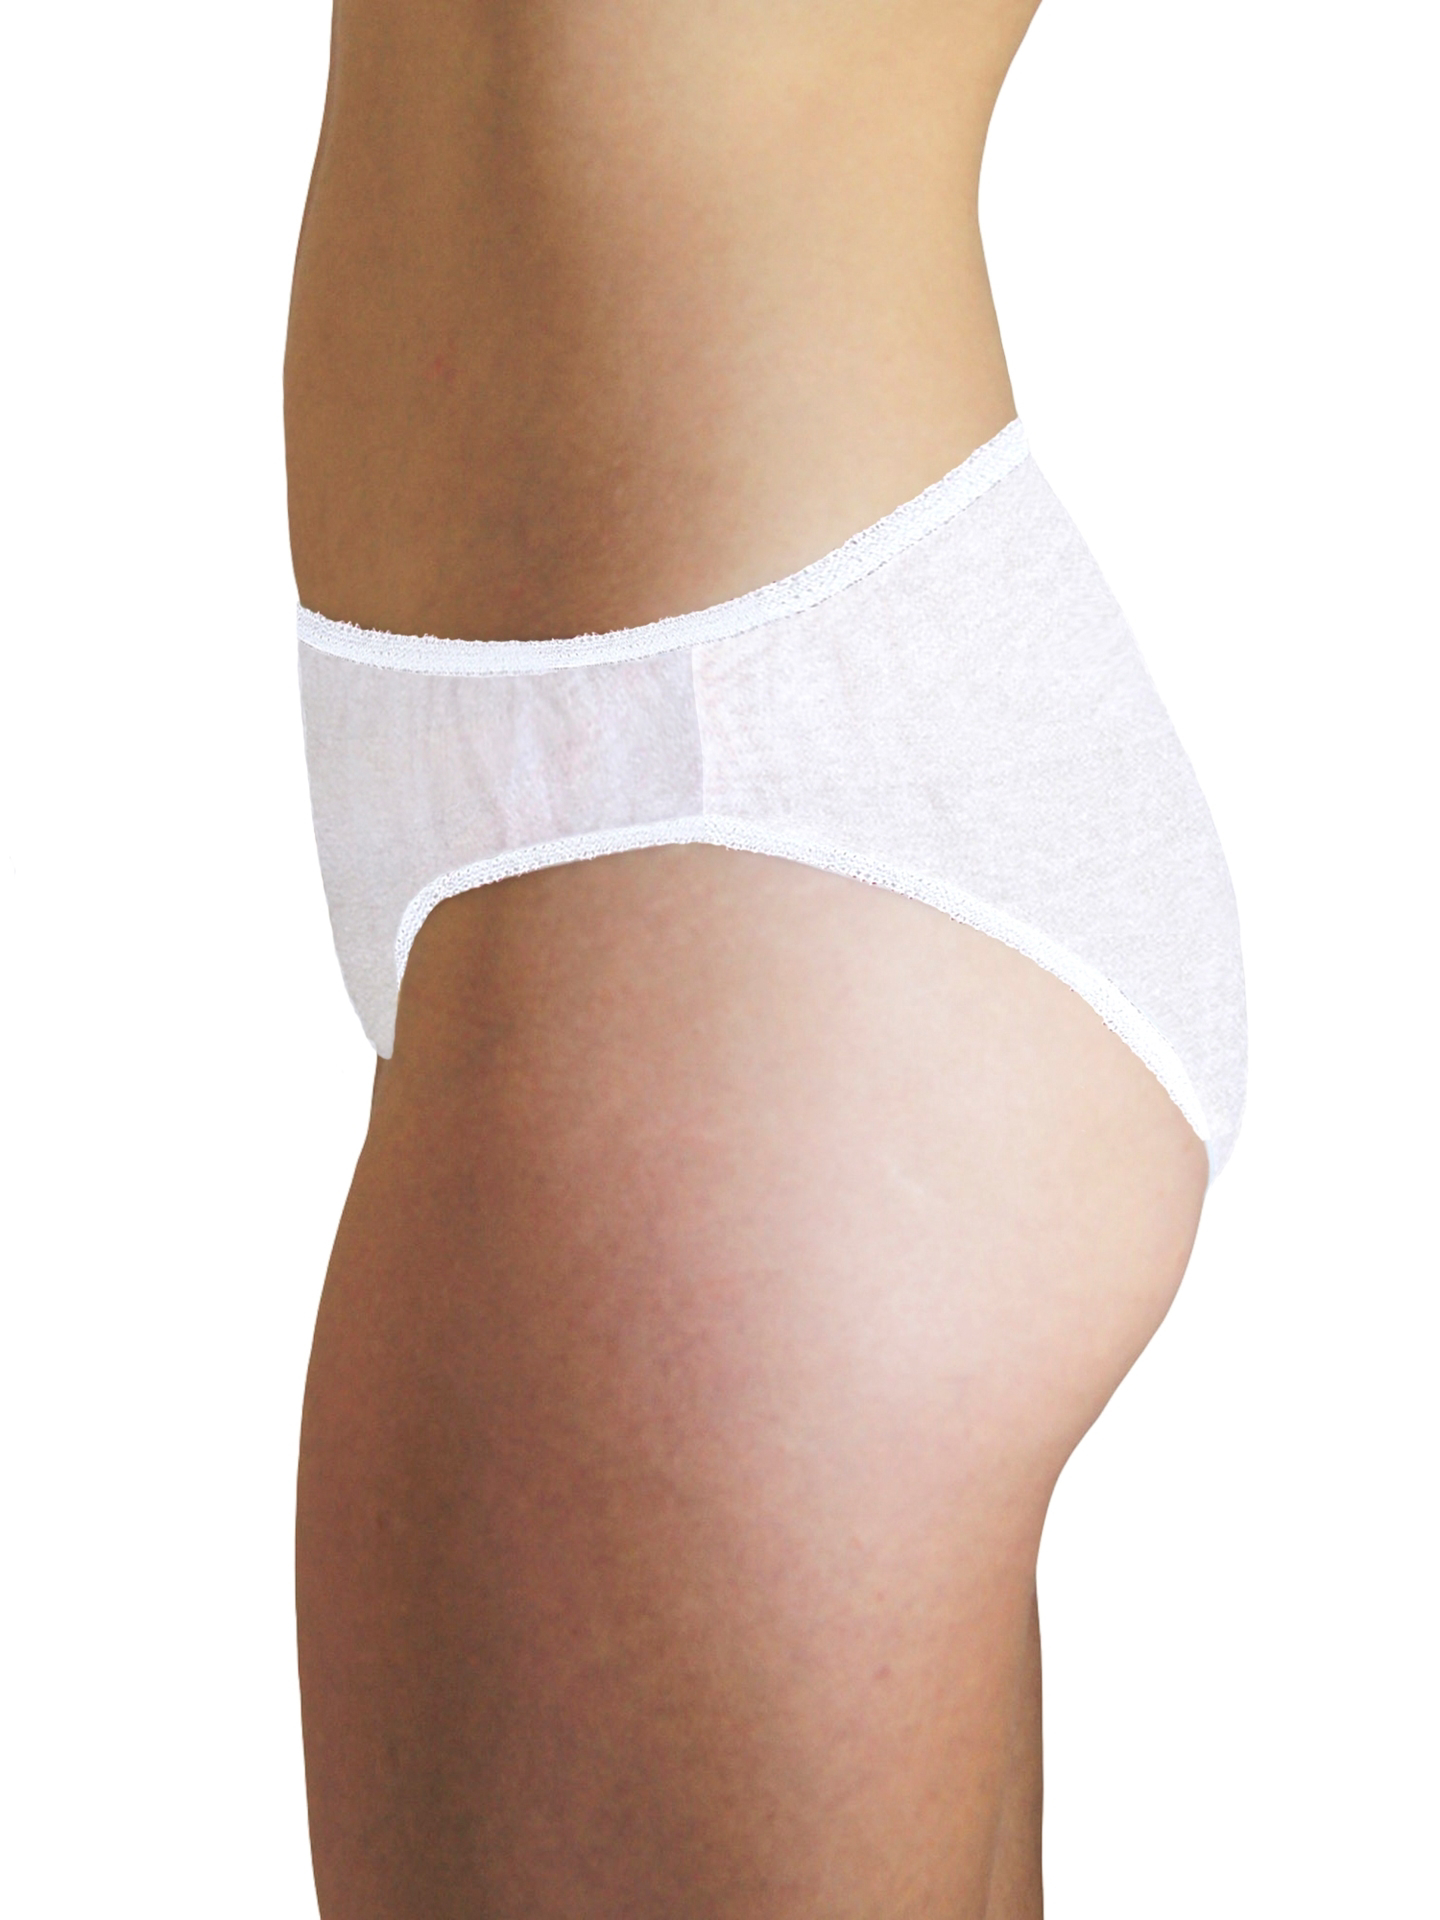  Disposable Panties for Women, Womens Disposable Cotton